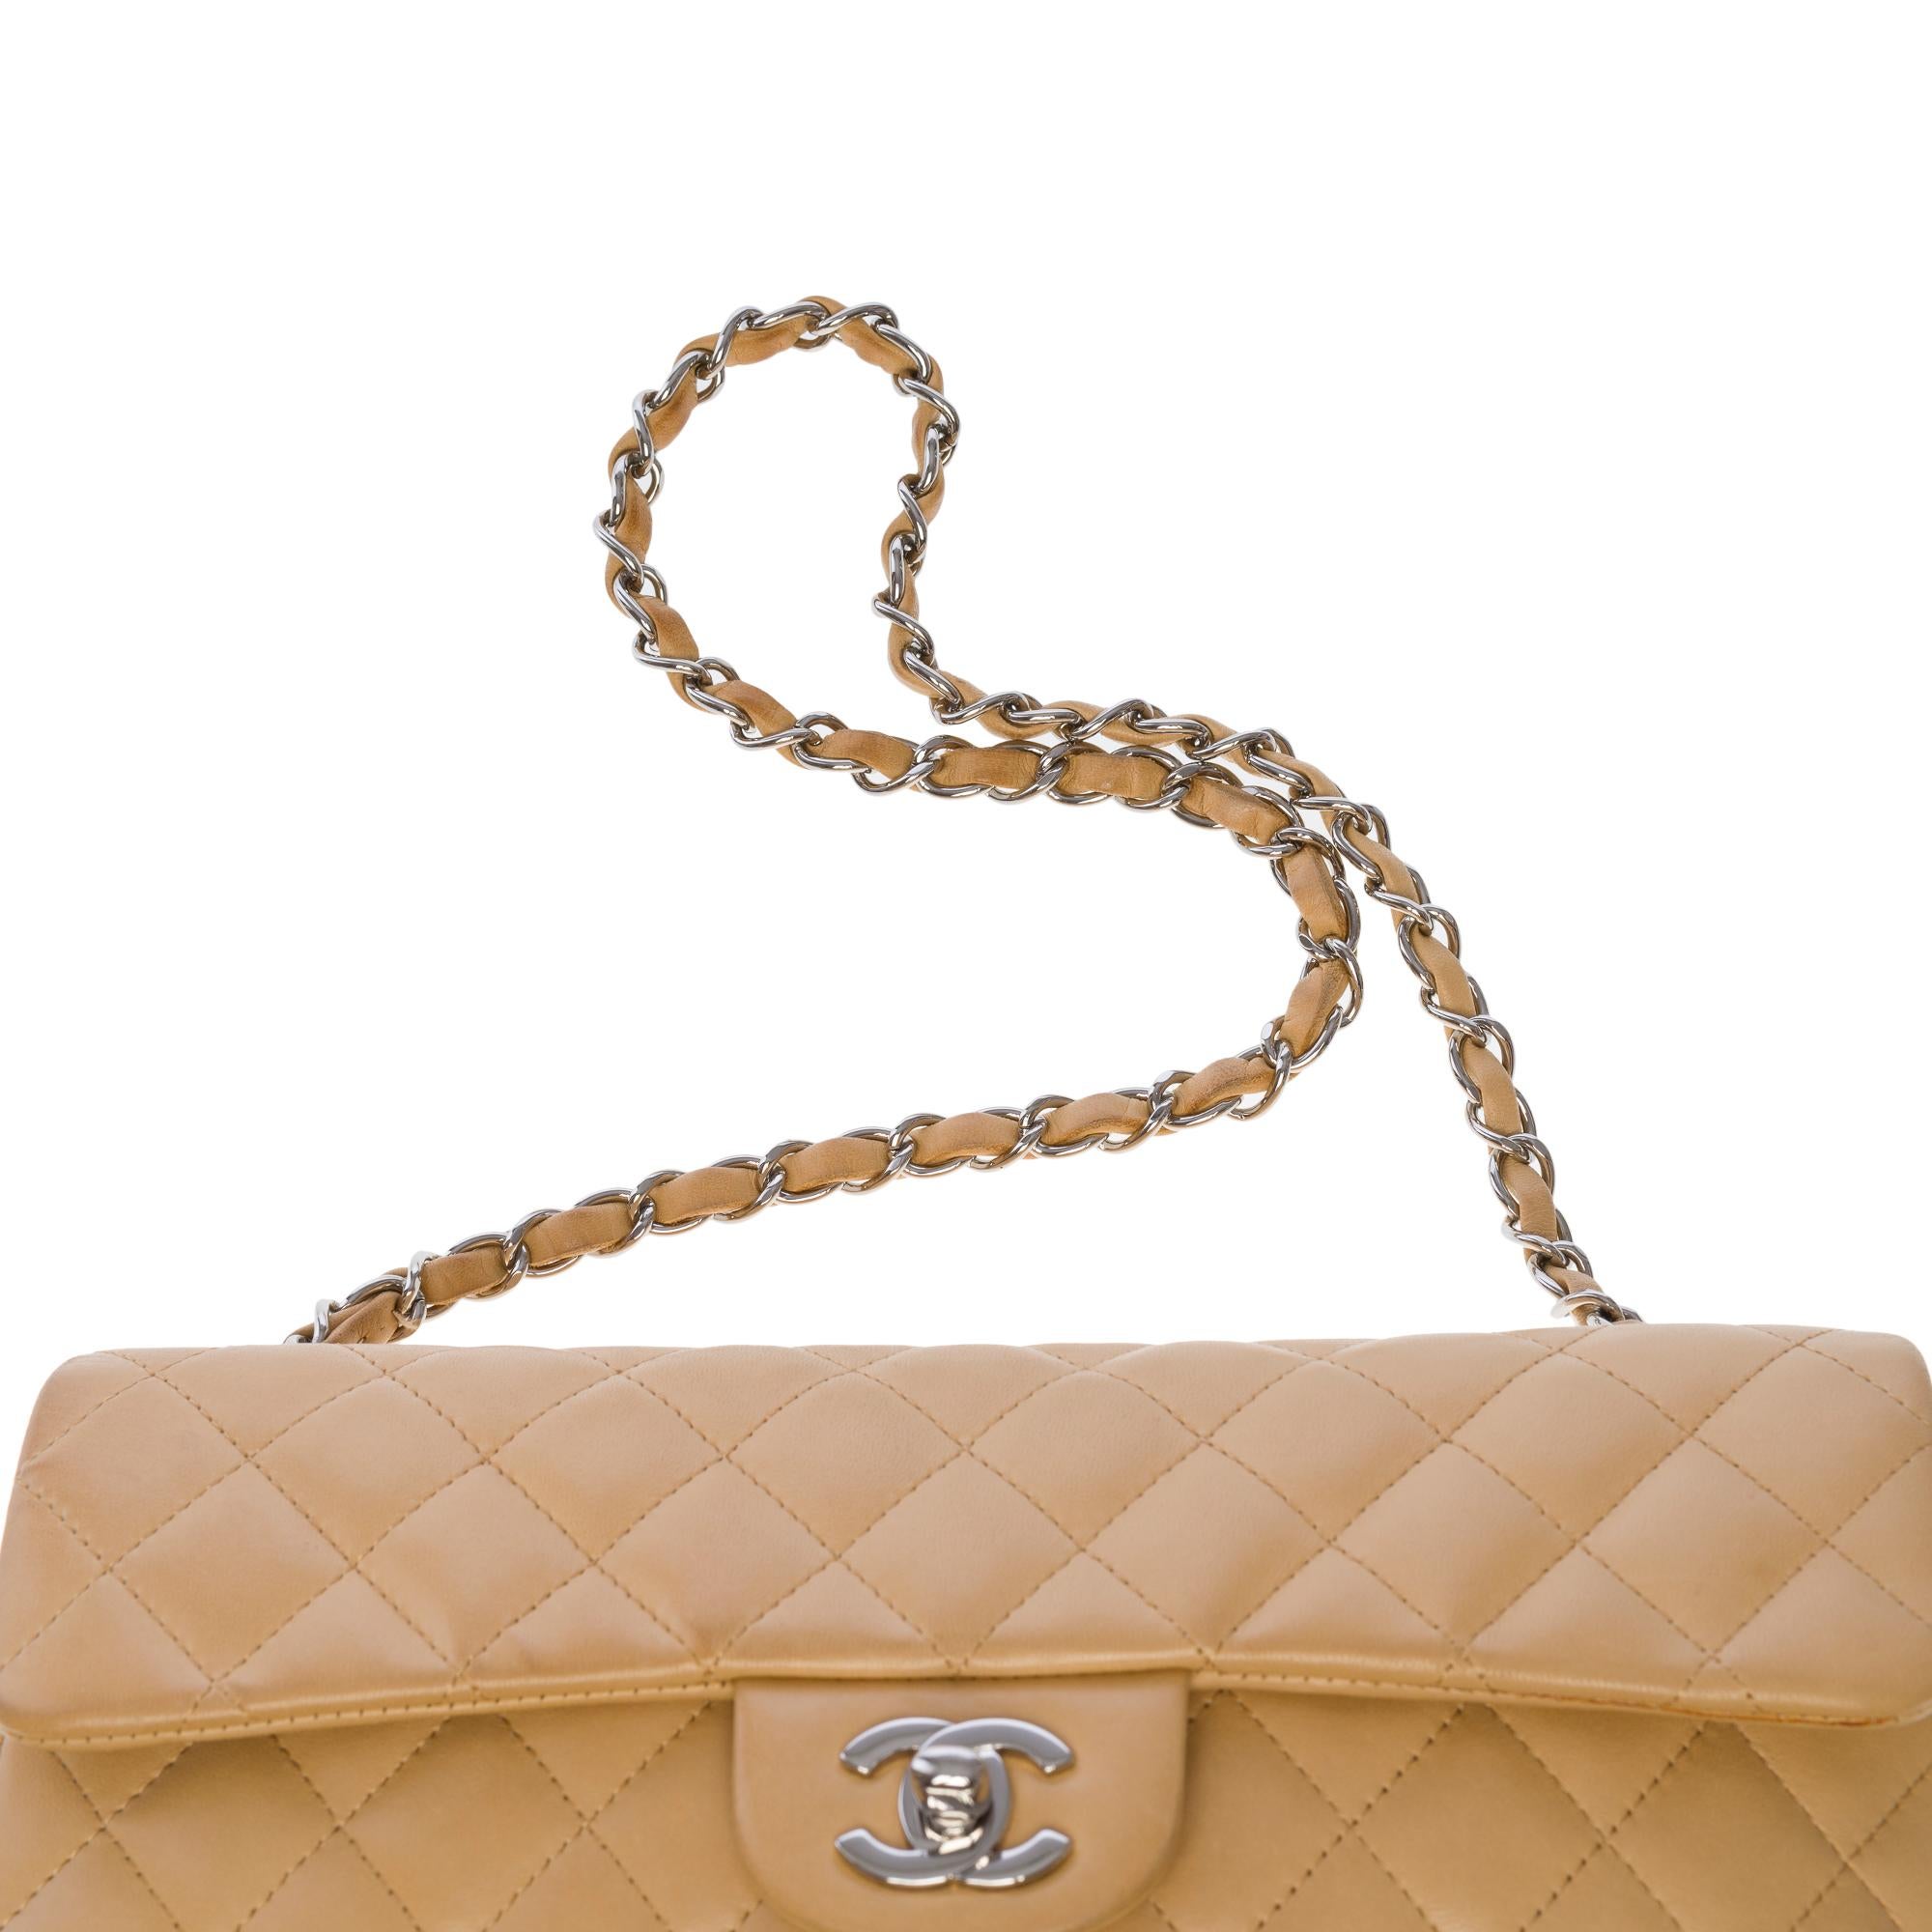 Chanel Classic Baguette shoulder flap bag in beige quilted lambskin leather, SHW 5